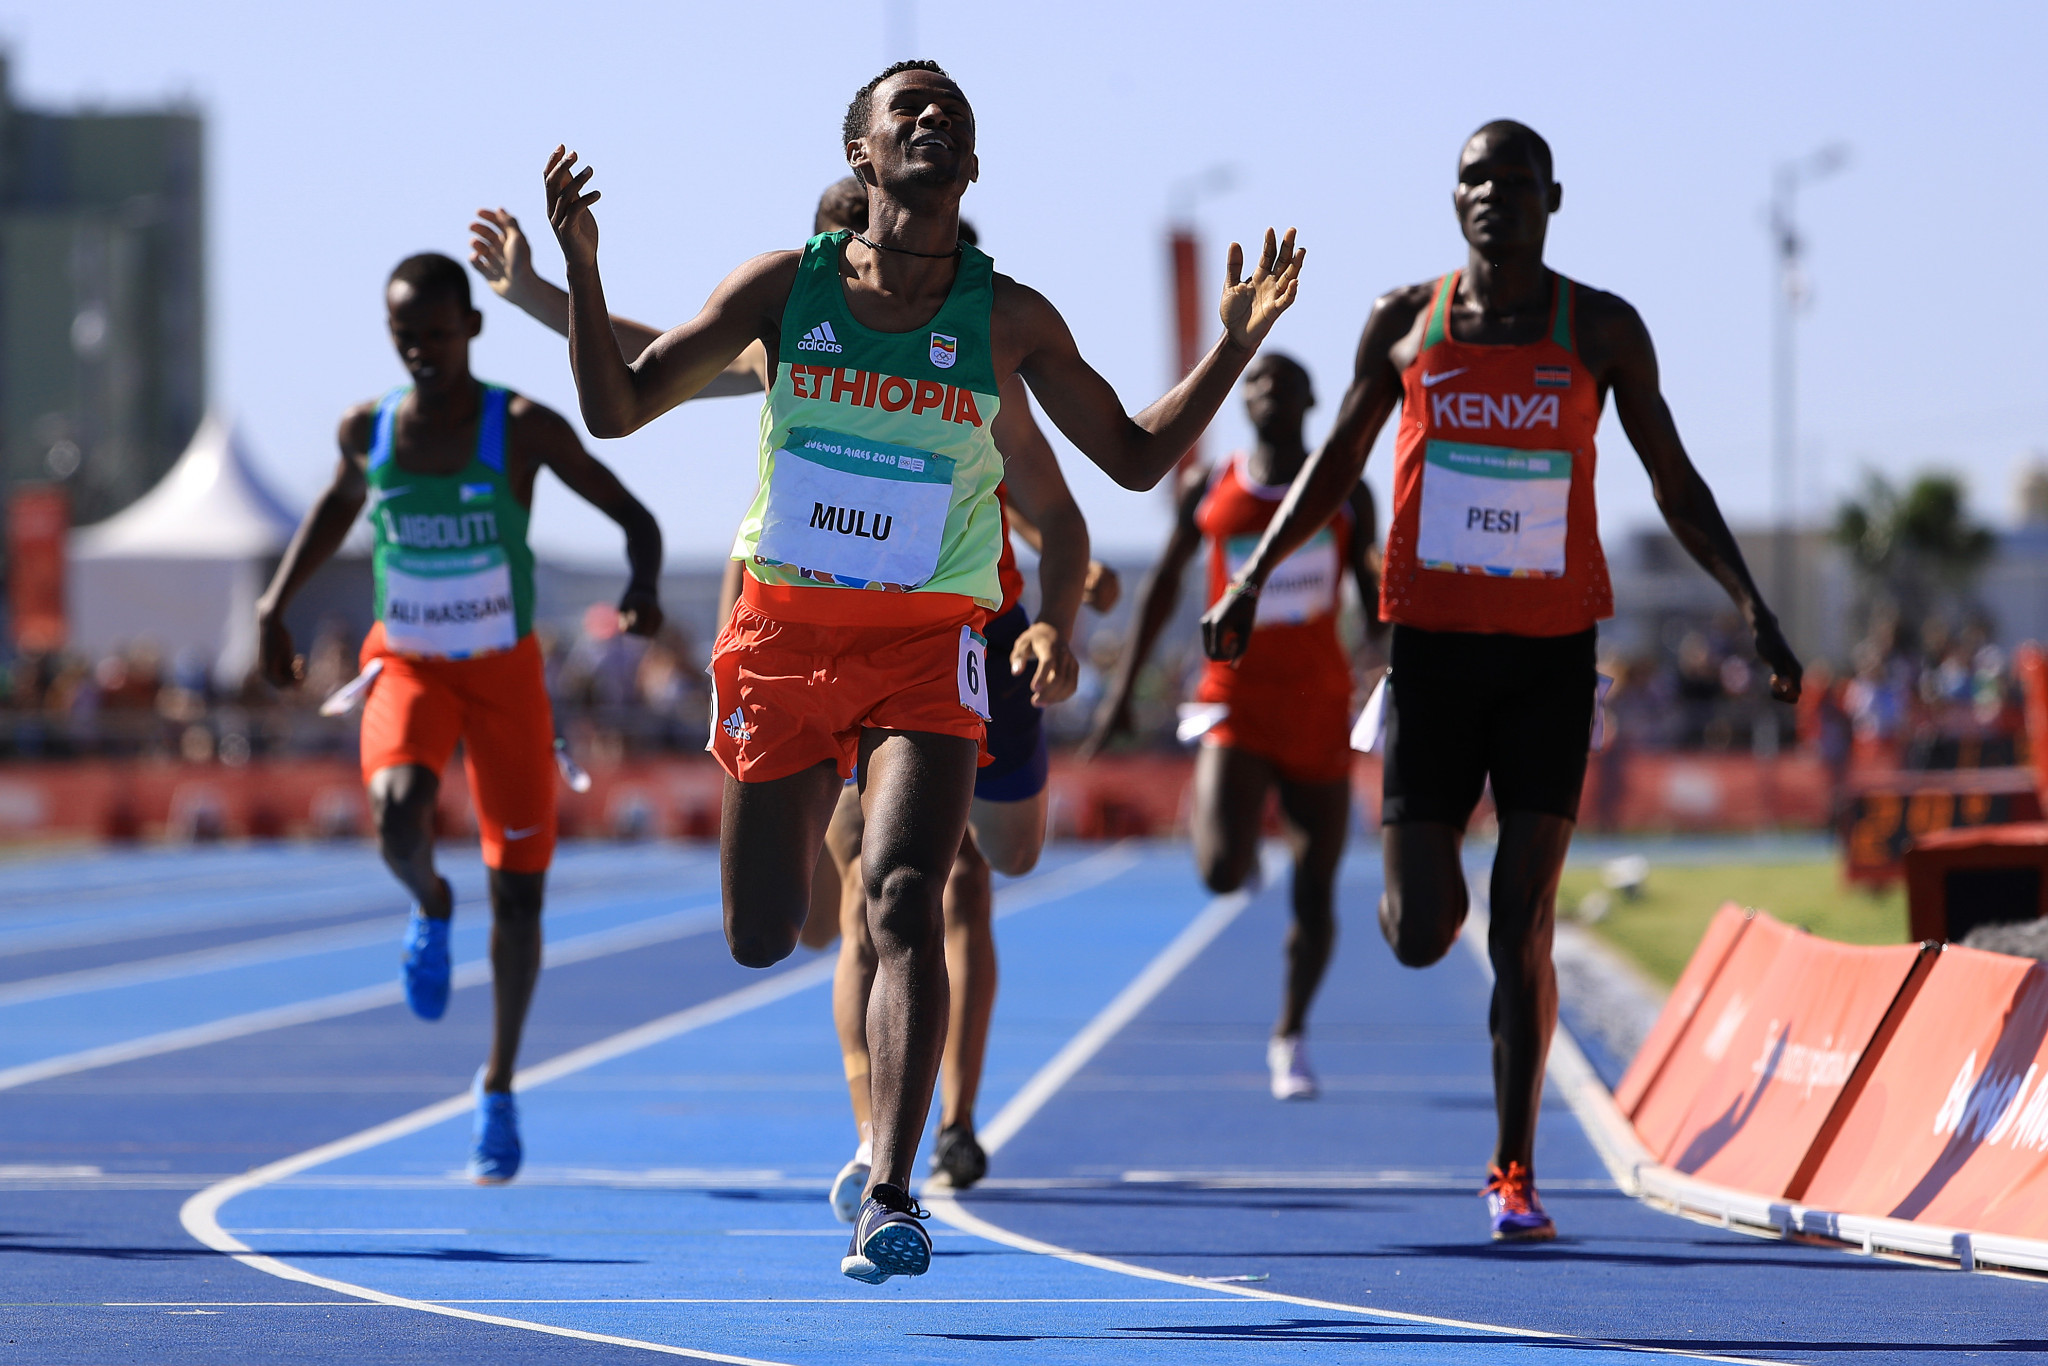 Ethiopia's Tasew Yada triumphed in the men's 800m ©Getty Images